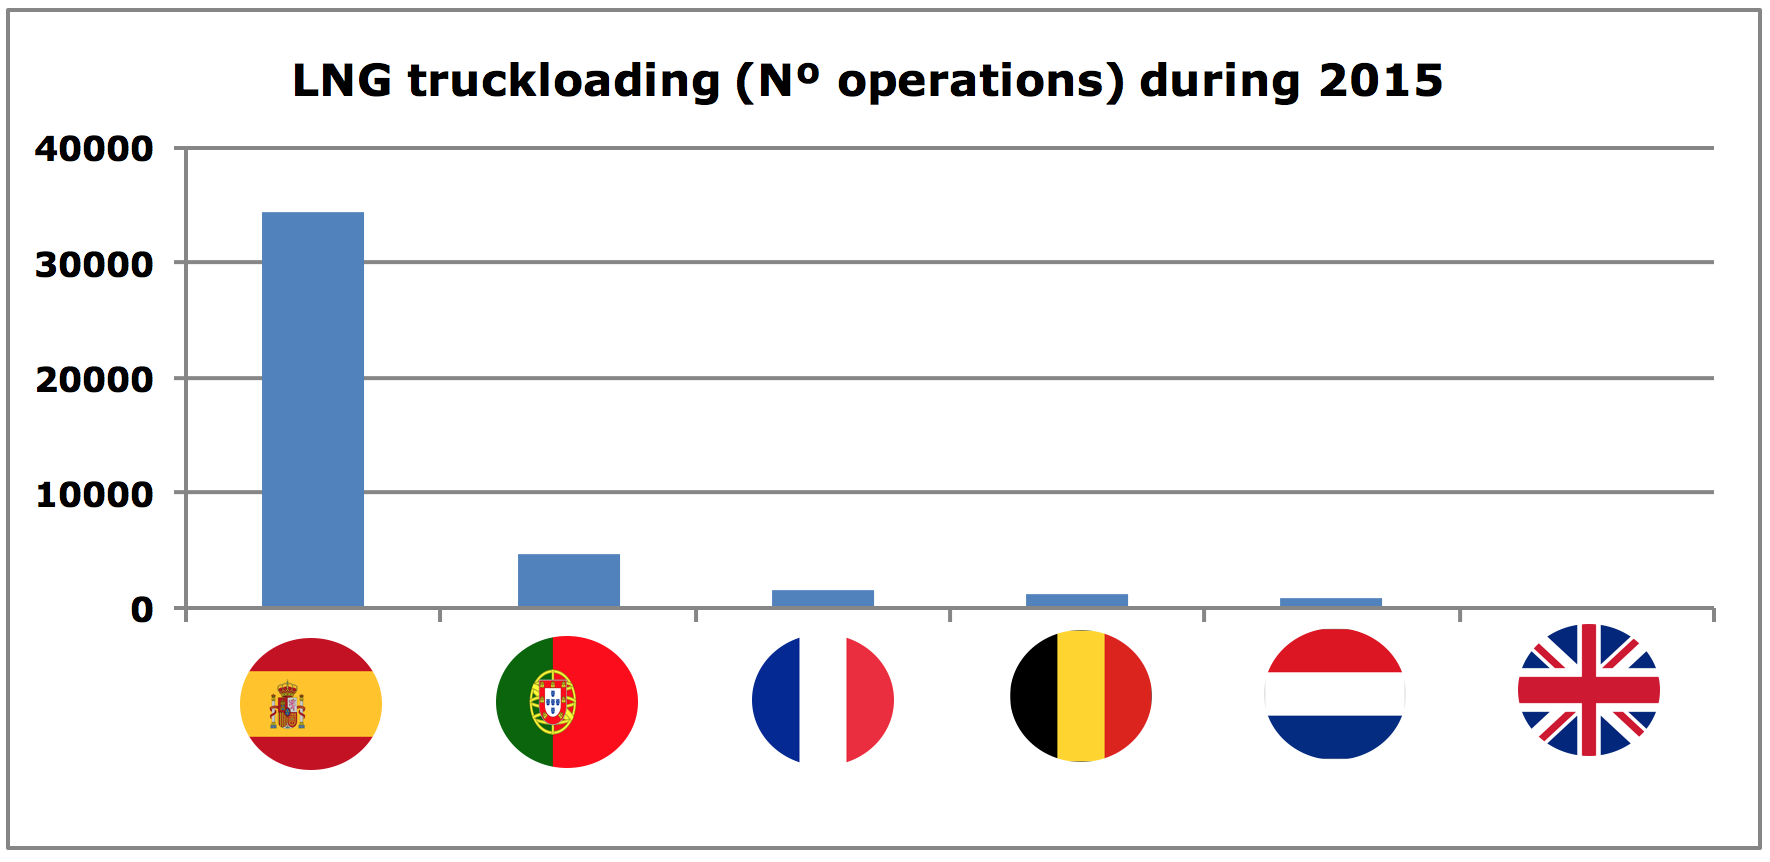 Comparison LNG Truckloading operations in EU large LNG terminals during 2015 aggregated by country